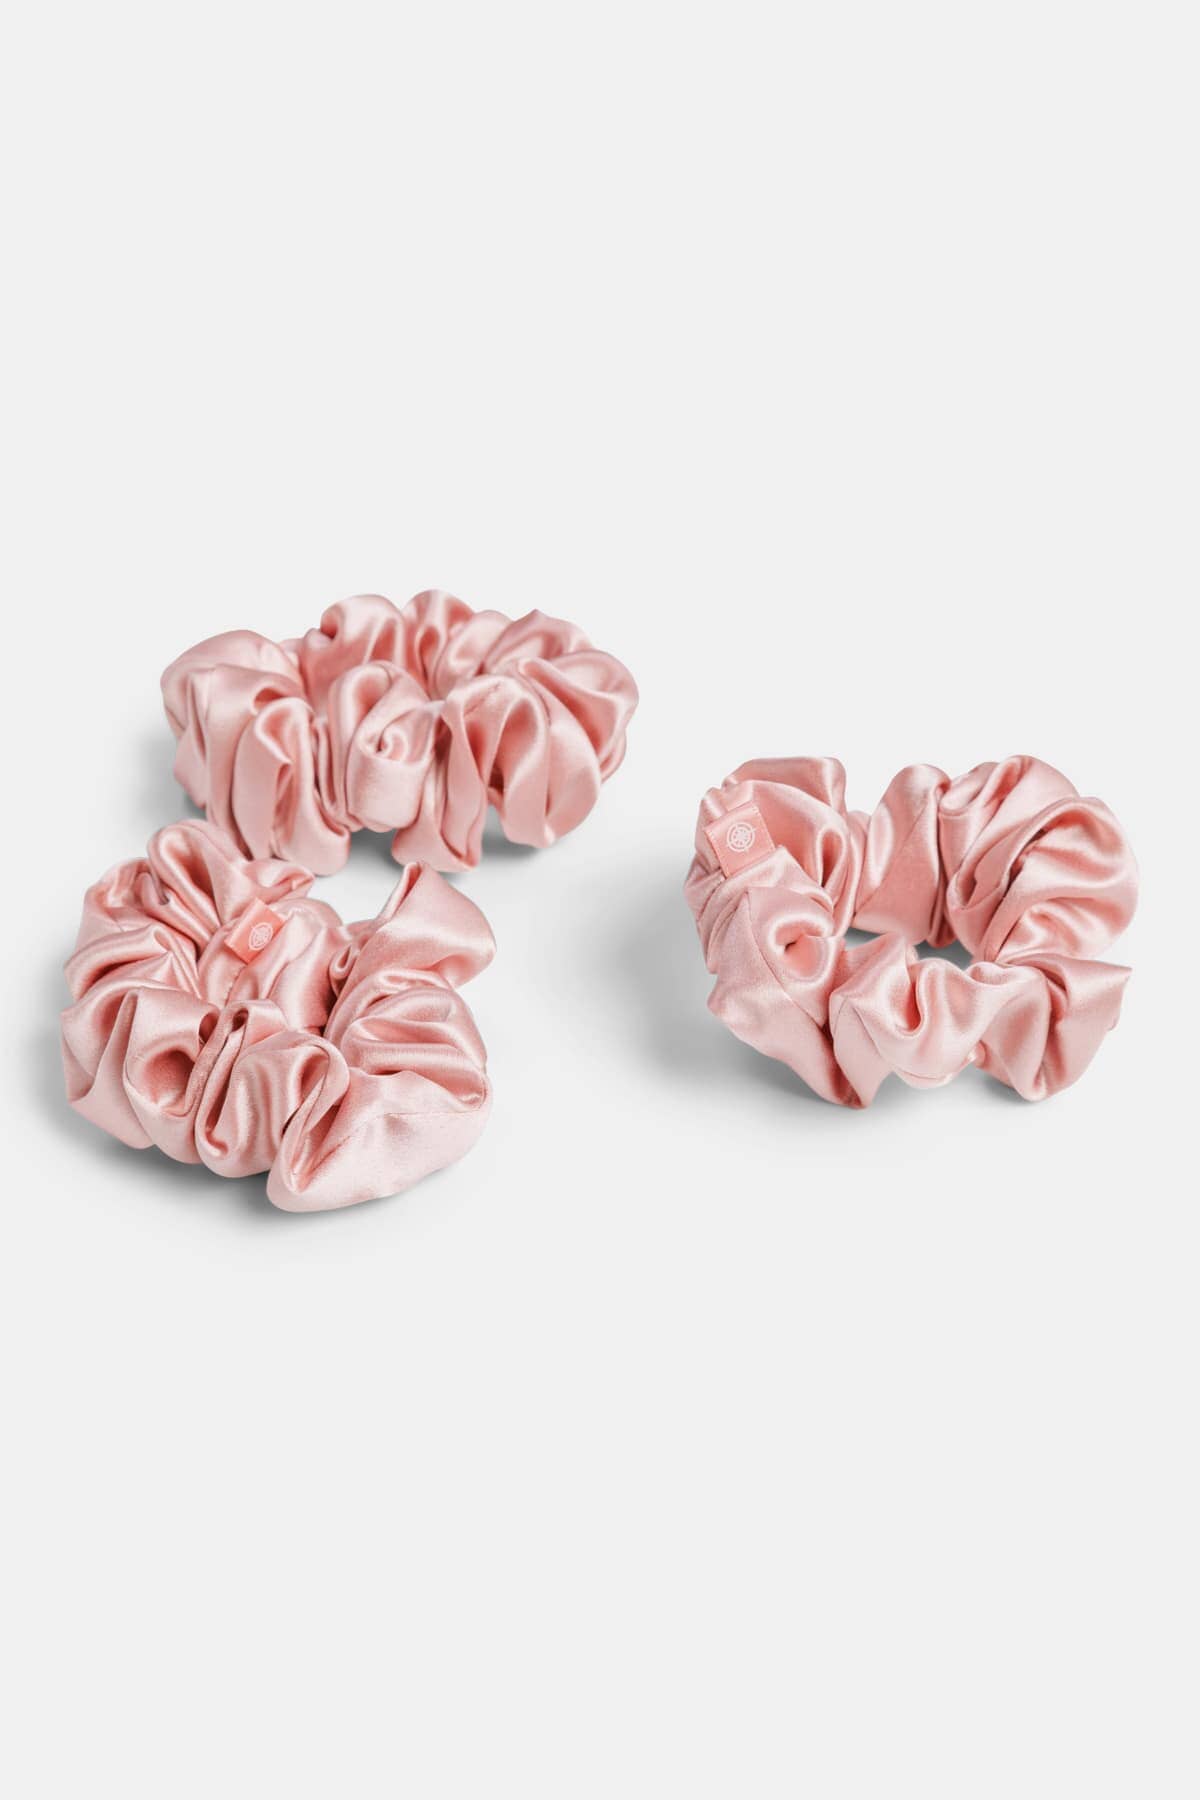 100% Pure Mulberry Silk Hair Scrunchies with Gift Box - Set of 3 Large Hair Ties Womens>Beauty>Hair Care Fishers Finery Pink 